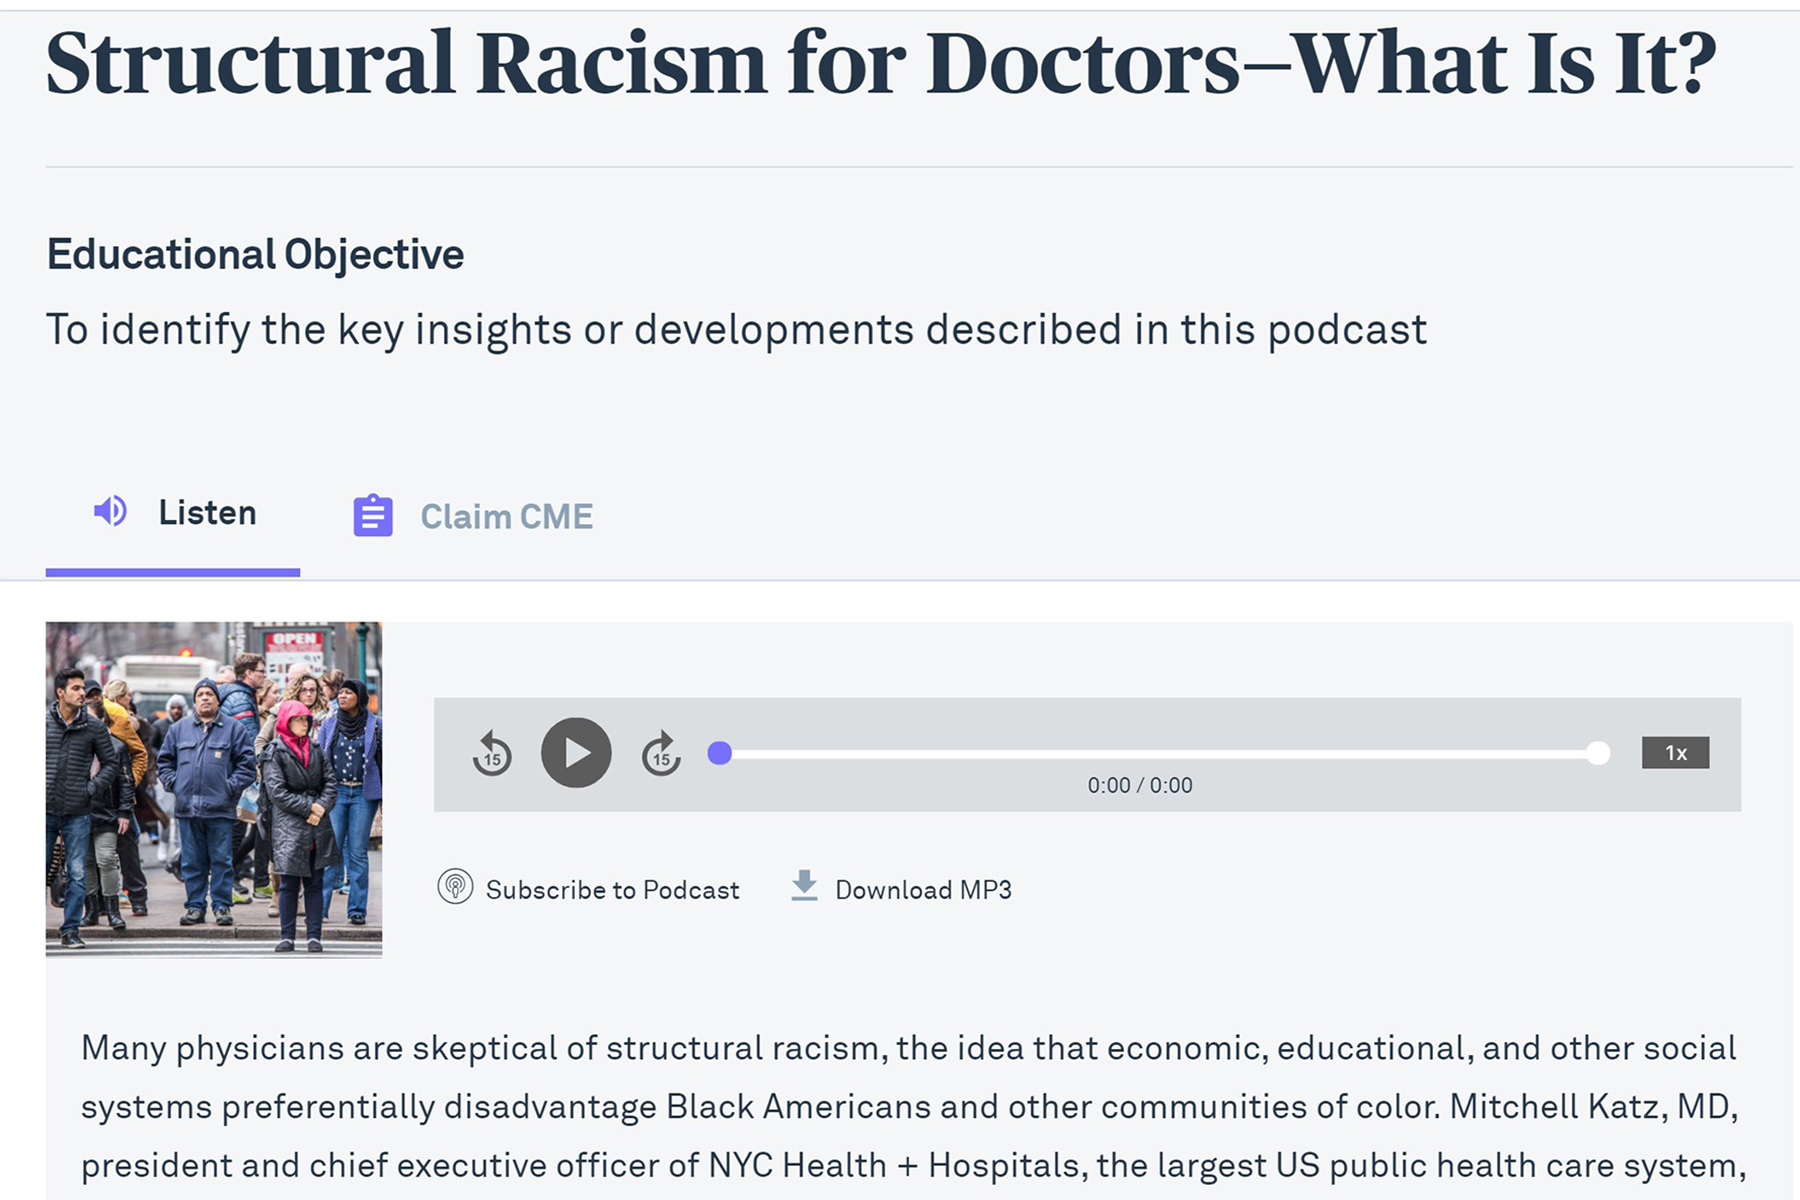 JAMA Podcast on Racism in Remedy Faces Backlash